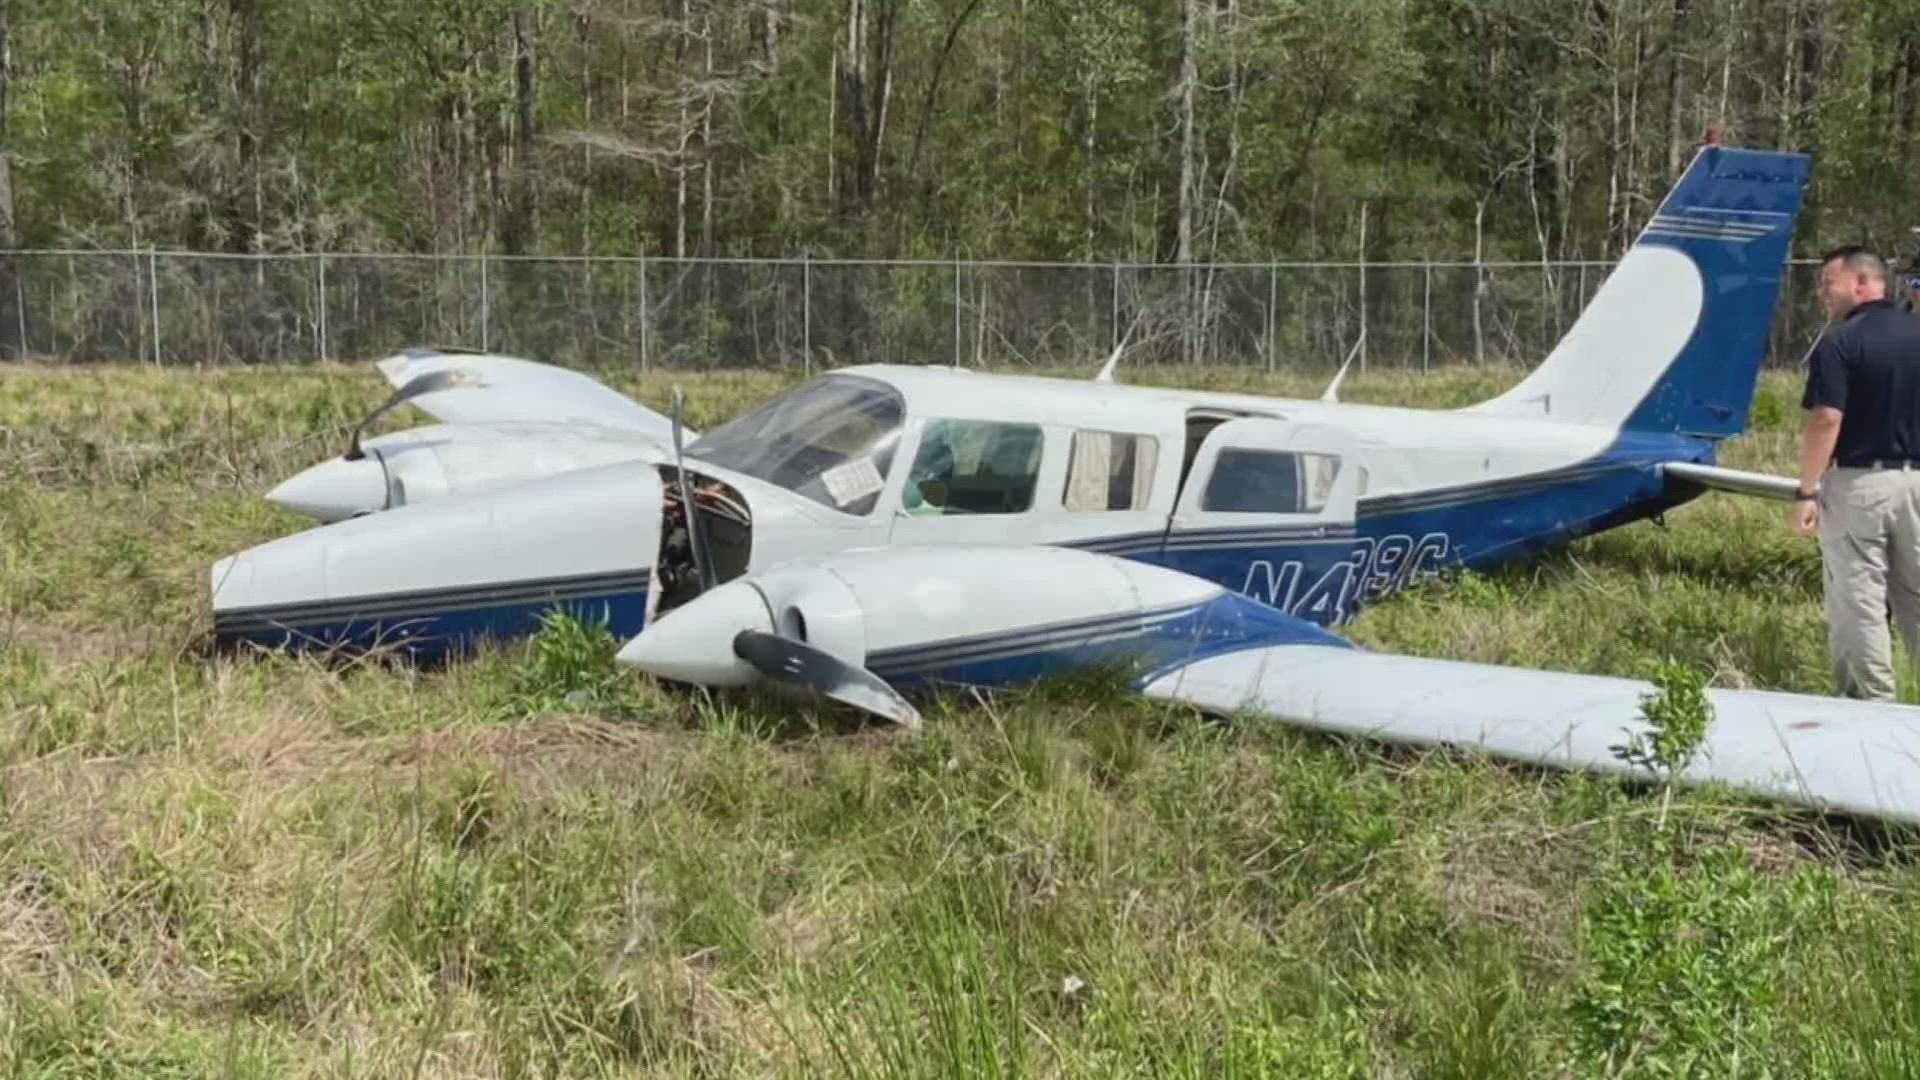 Authorities are working to determine what caused the plane crash.